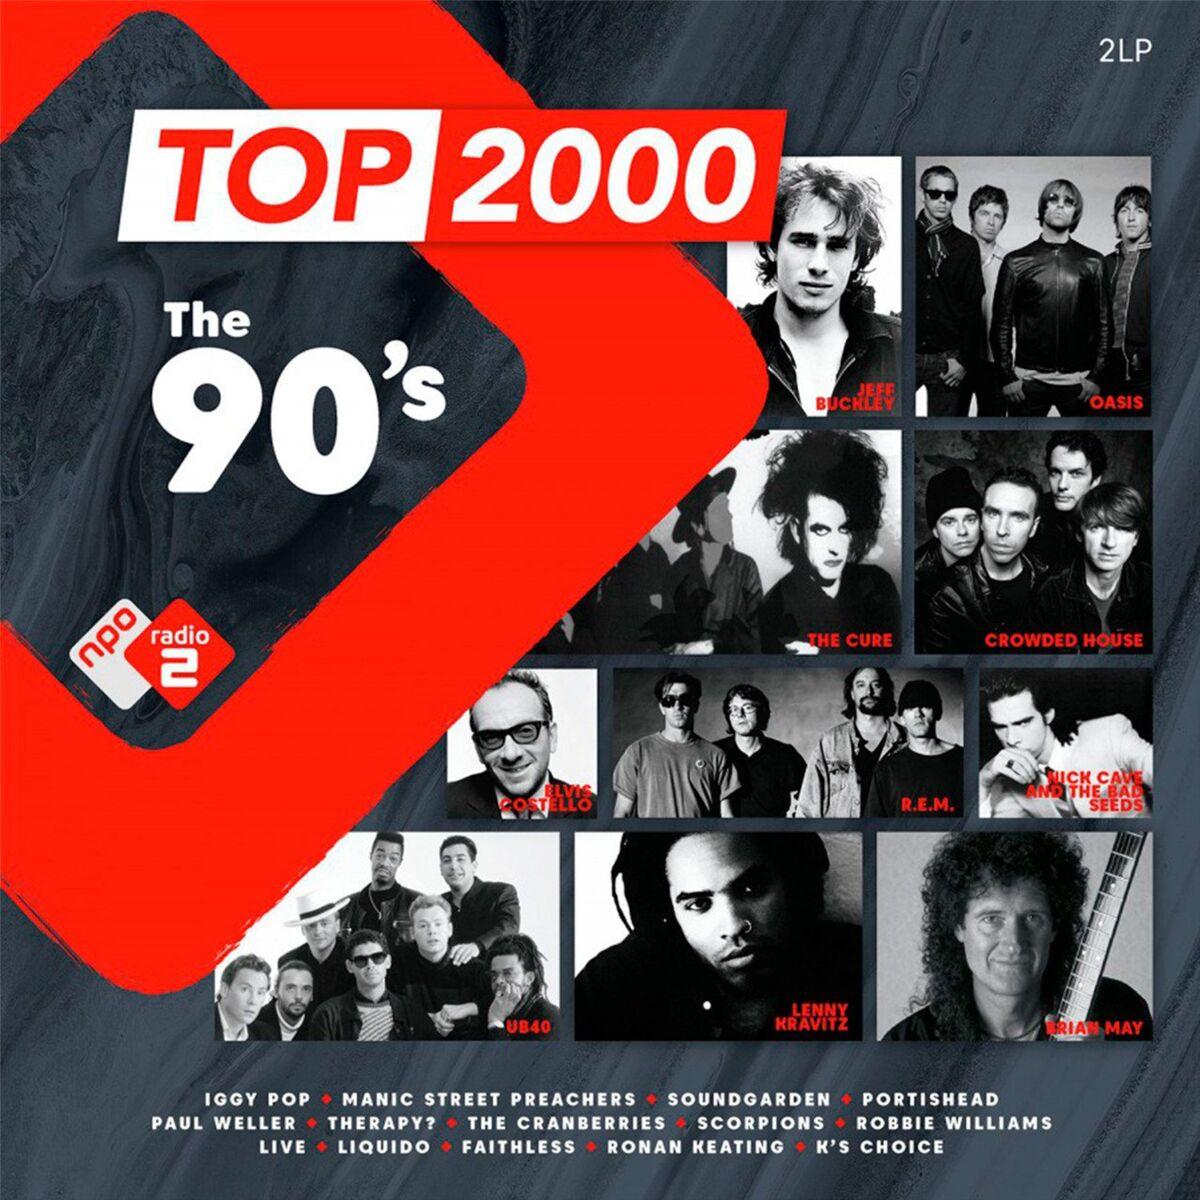 Top 2000 - The 90's 2LP